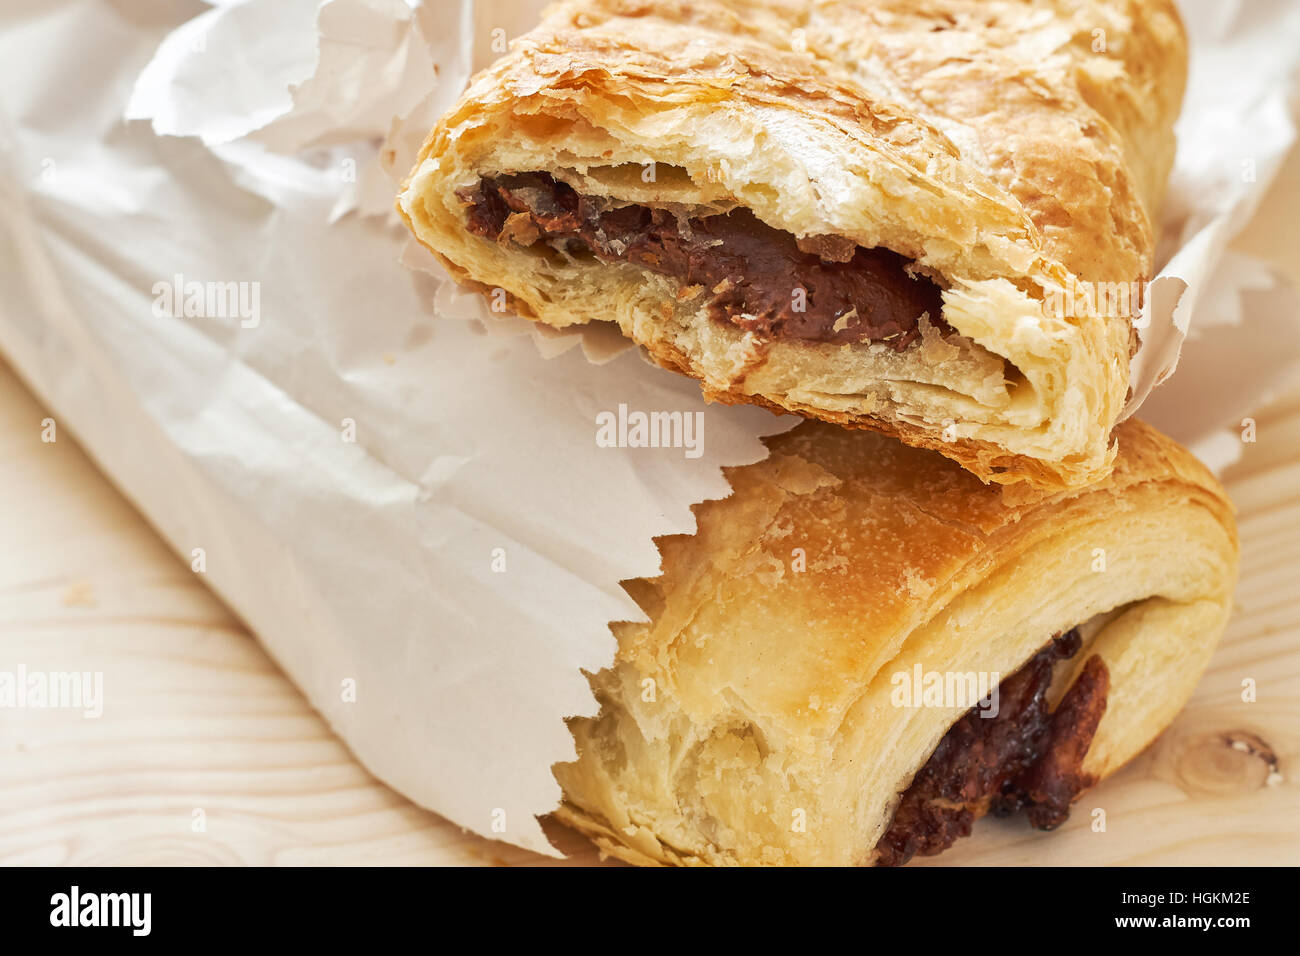 Puff pastry with chocolate filling in white paper bag on wooden background Stock Photo